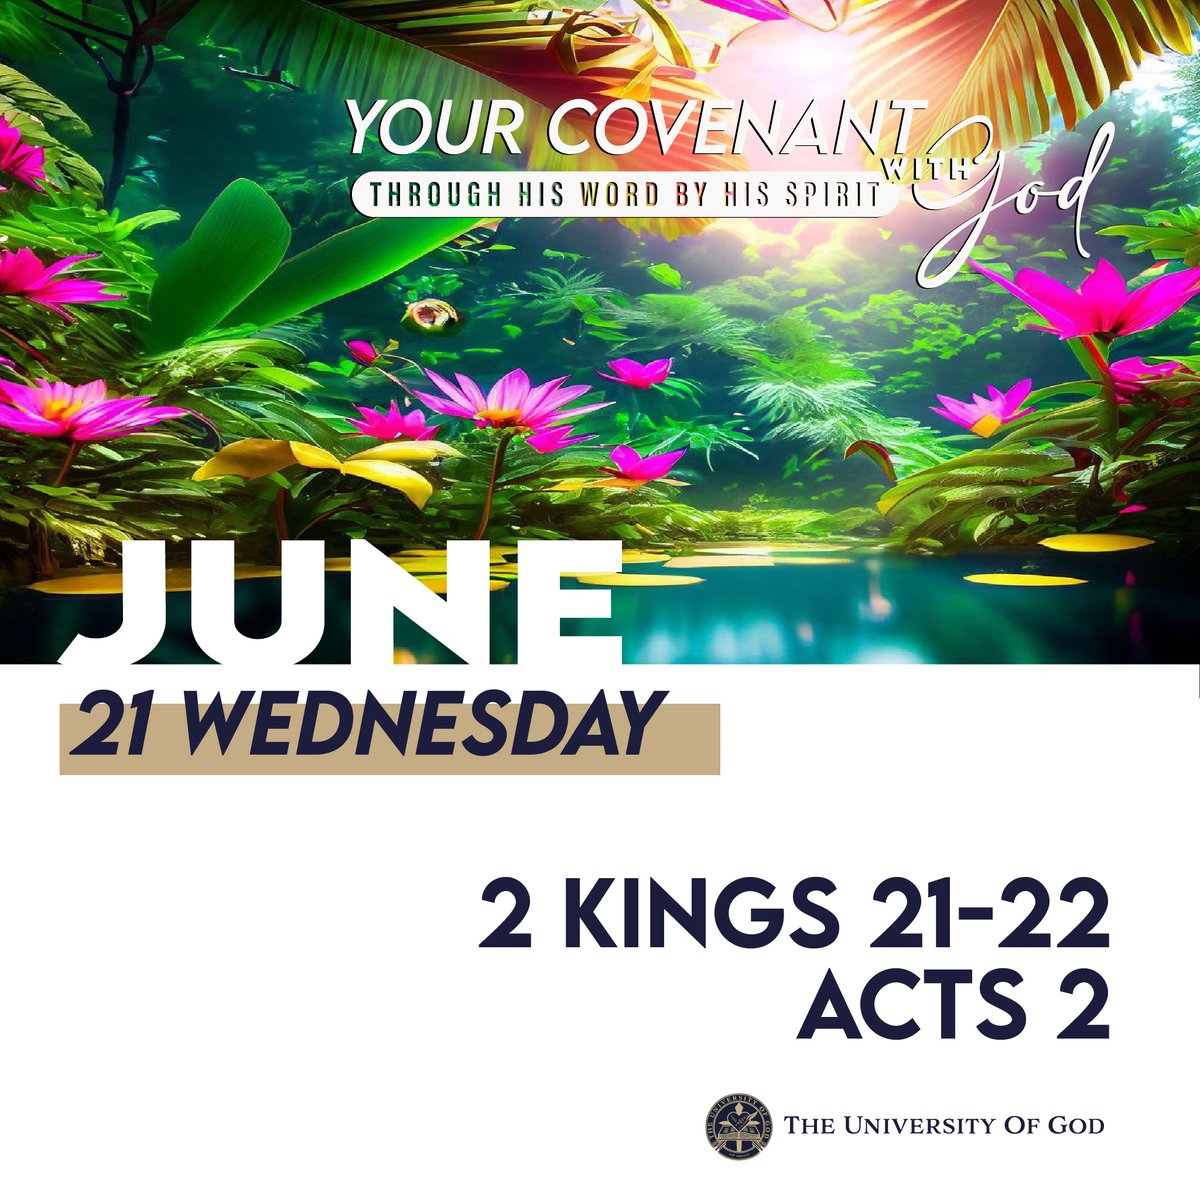 'God does not need a majority to fight His war, He needs suitable men and women (Judges 7:4-7).'

Download your daily reading plan for the year 2023: bit.ly/3TMgQCO
#CovenantWithGod #Week25 #UOG #Racine #Ruth